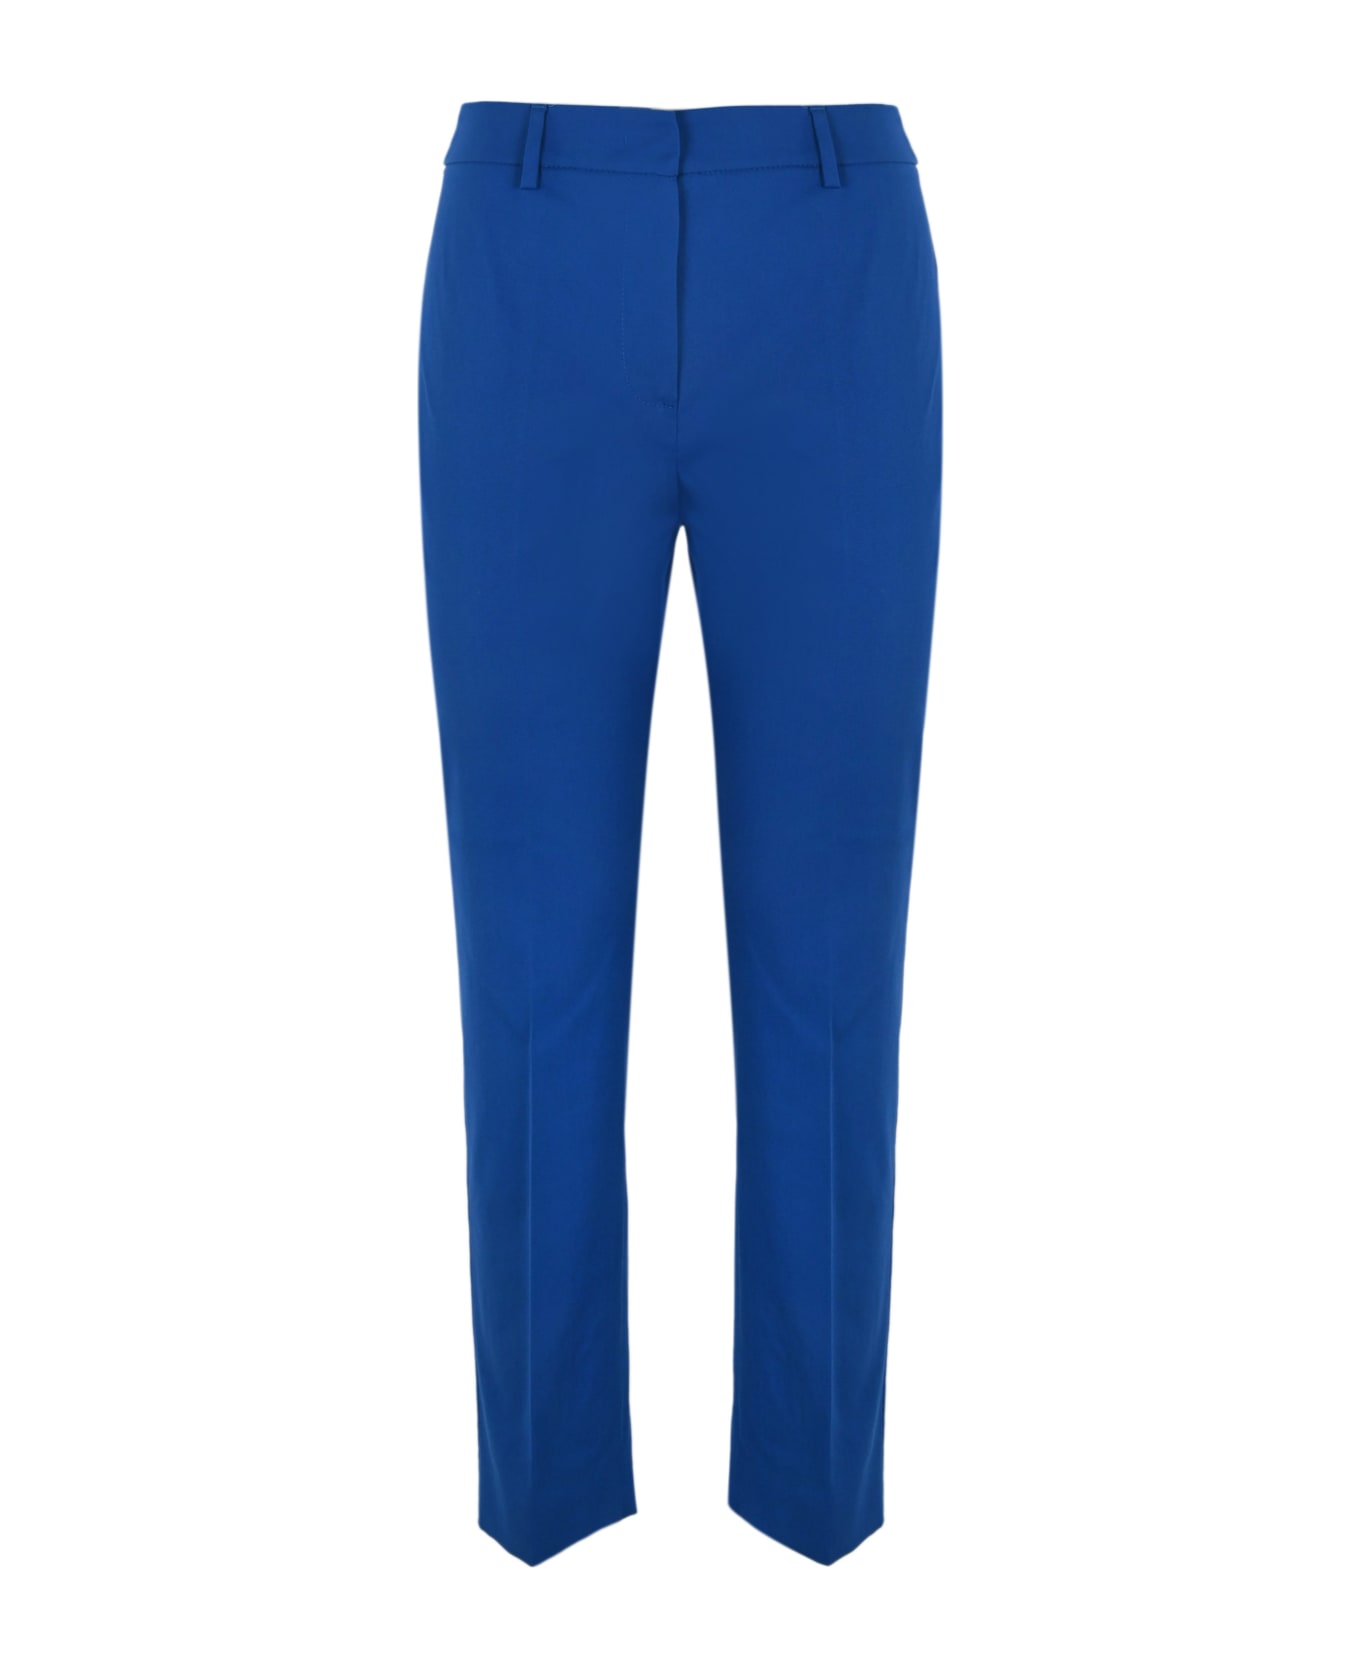 Weekend Max Mara "cecco" Stretch Cotton Trousers - Oltremare